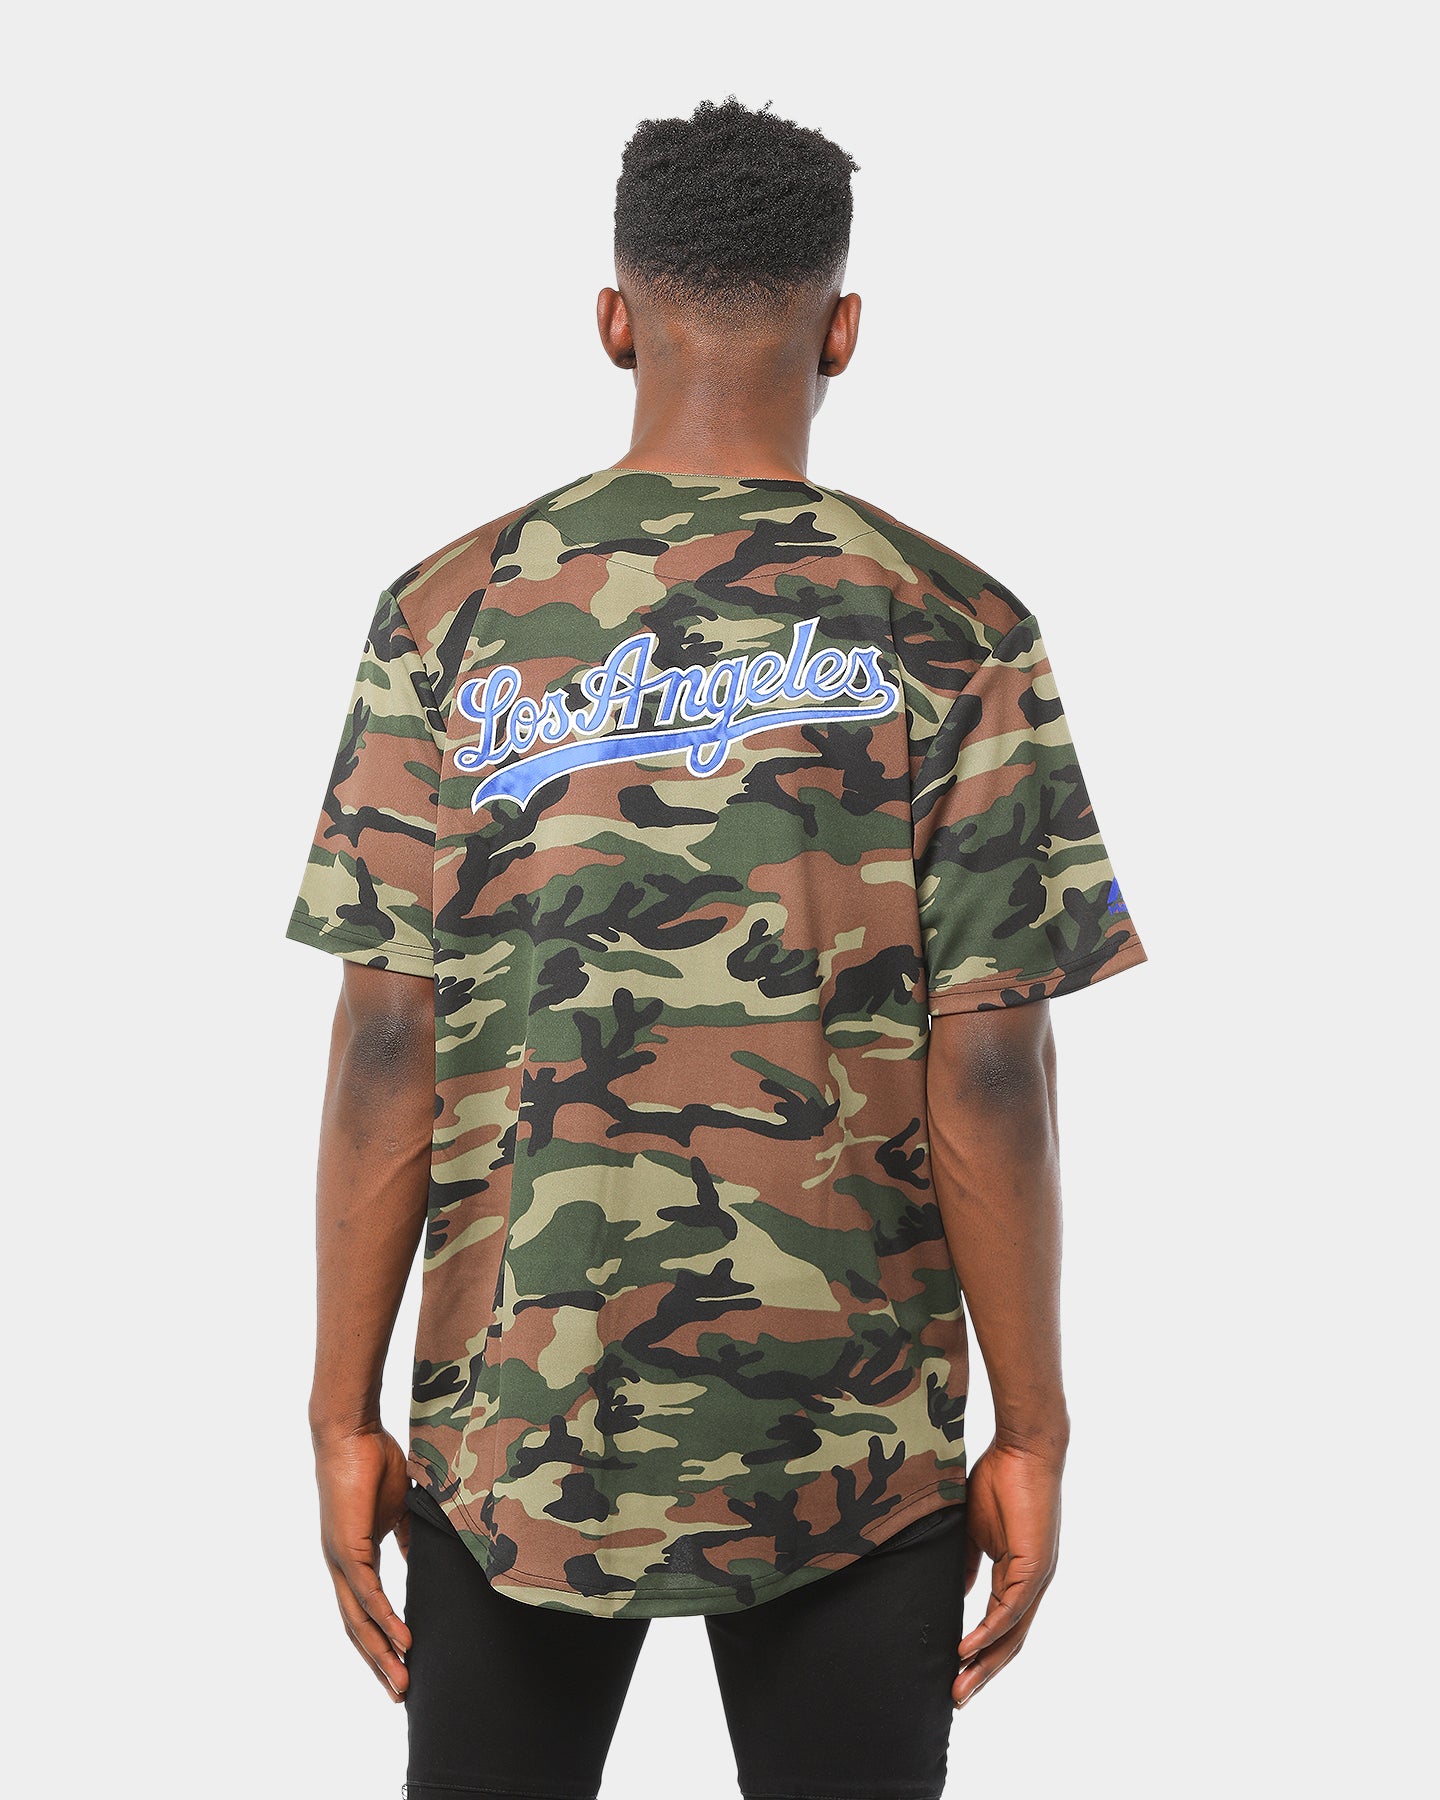 dodgers military jersey